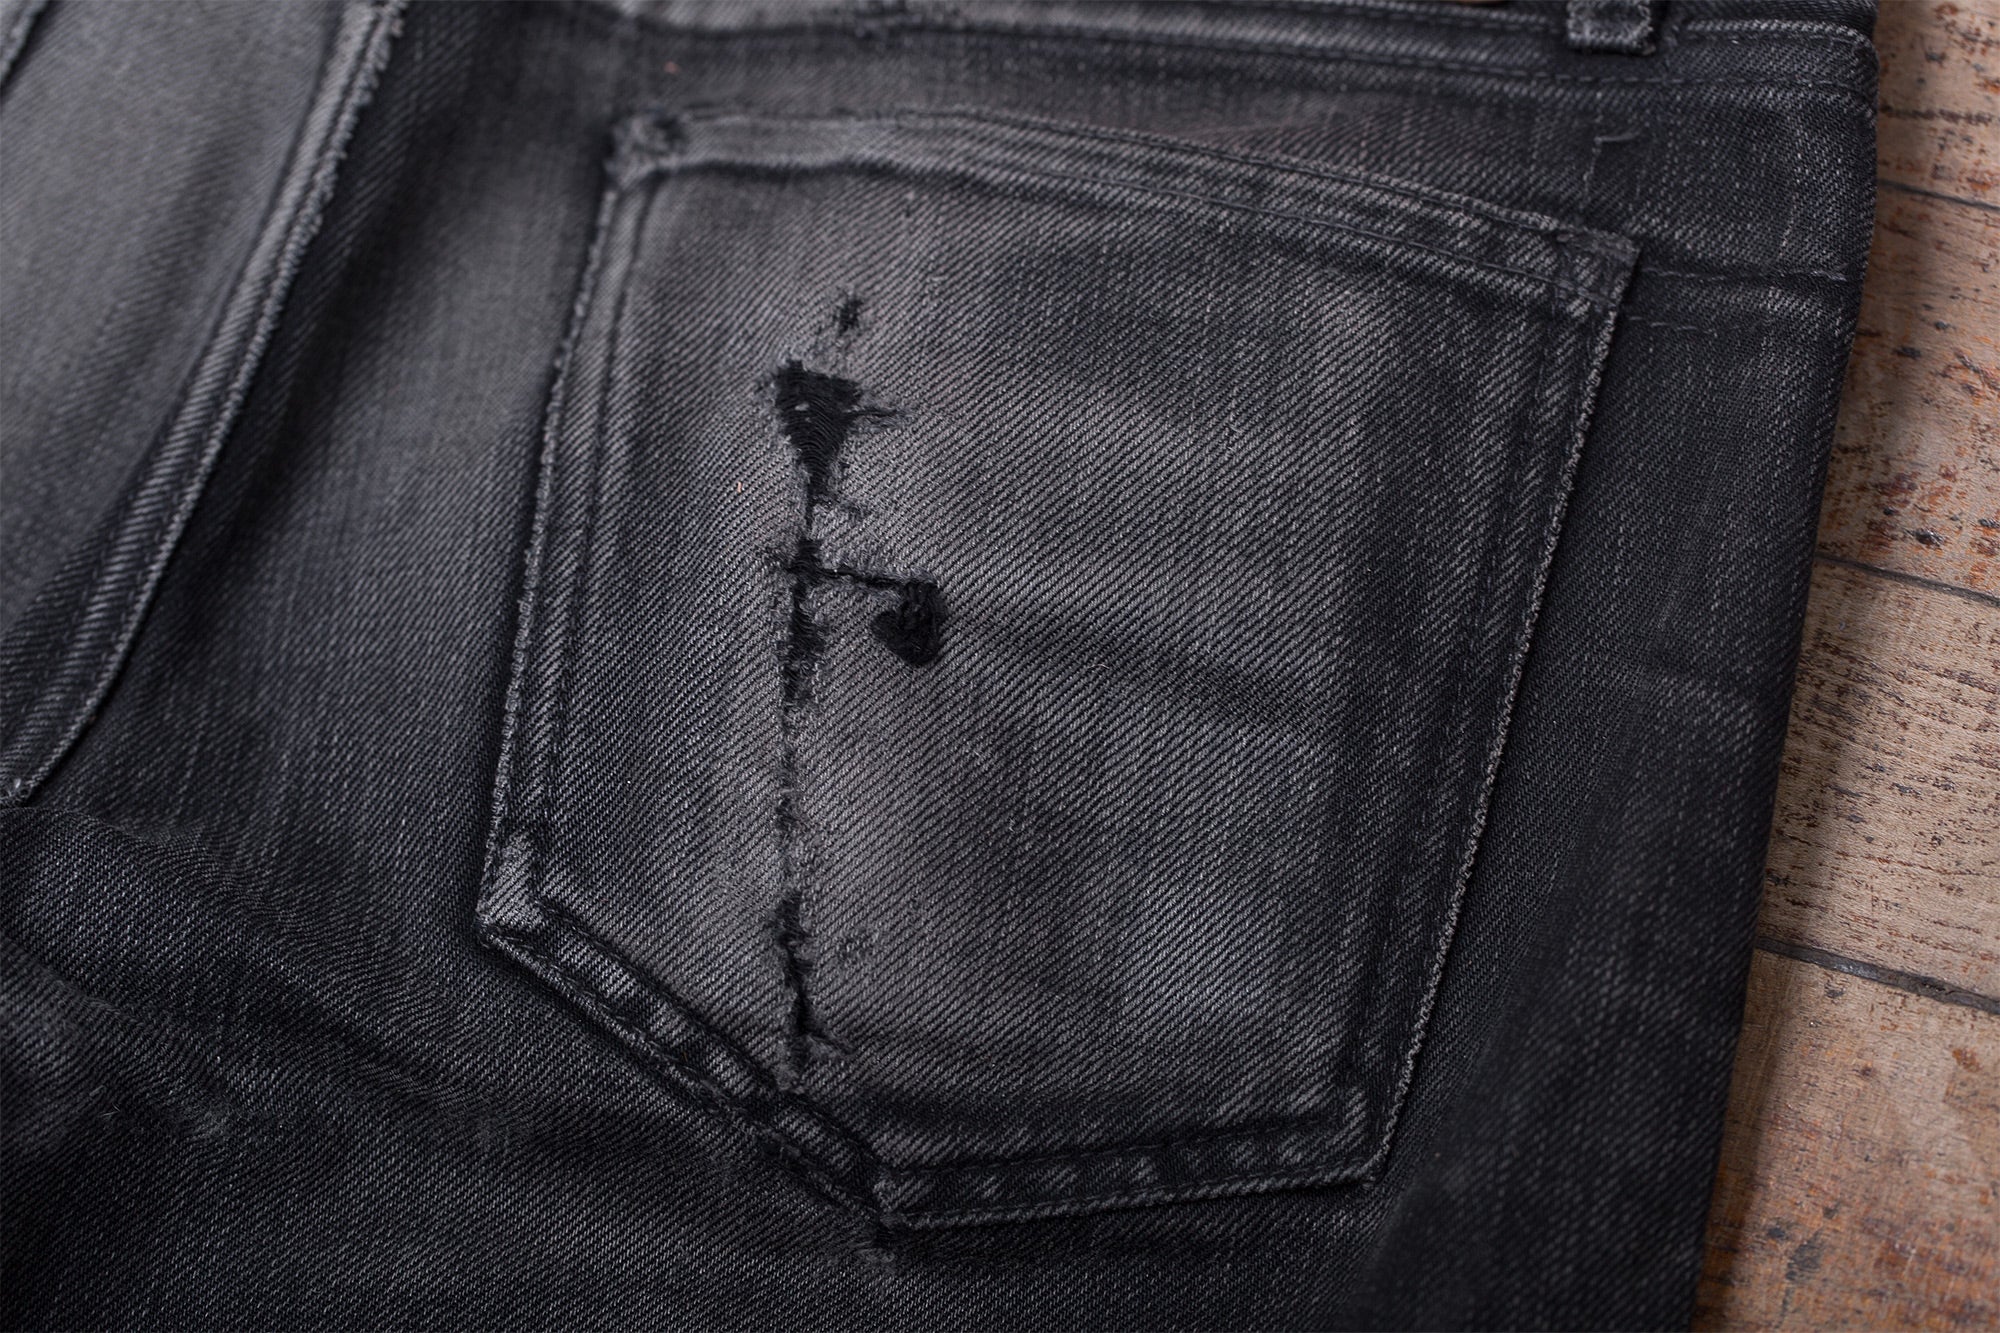 Detail photo of a pair of worn-in black jeans laying on a wooden floor.